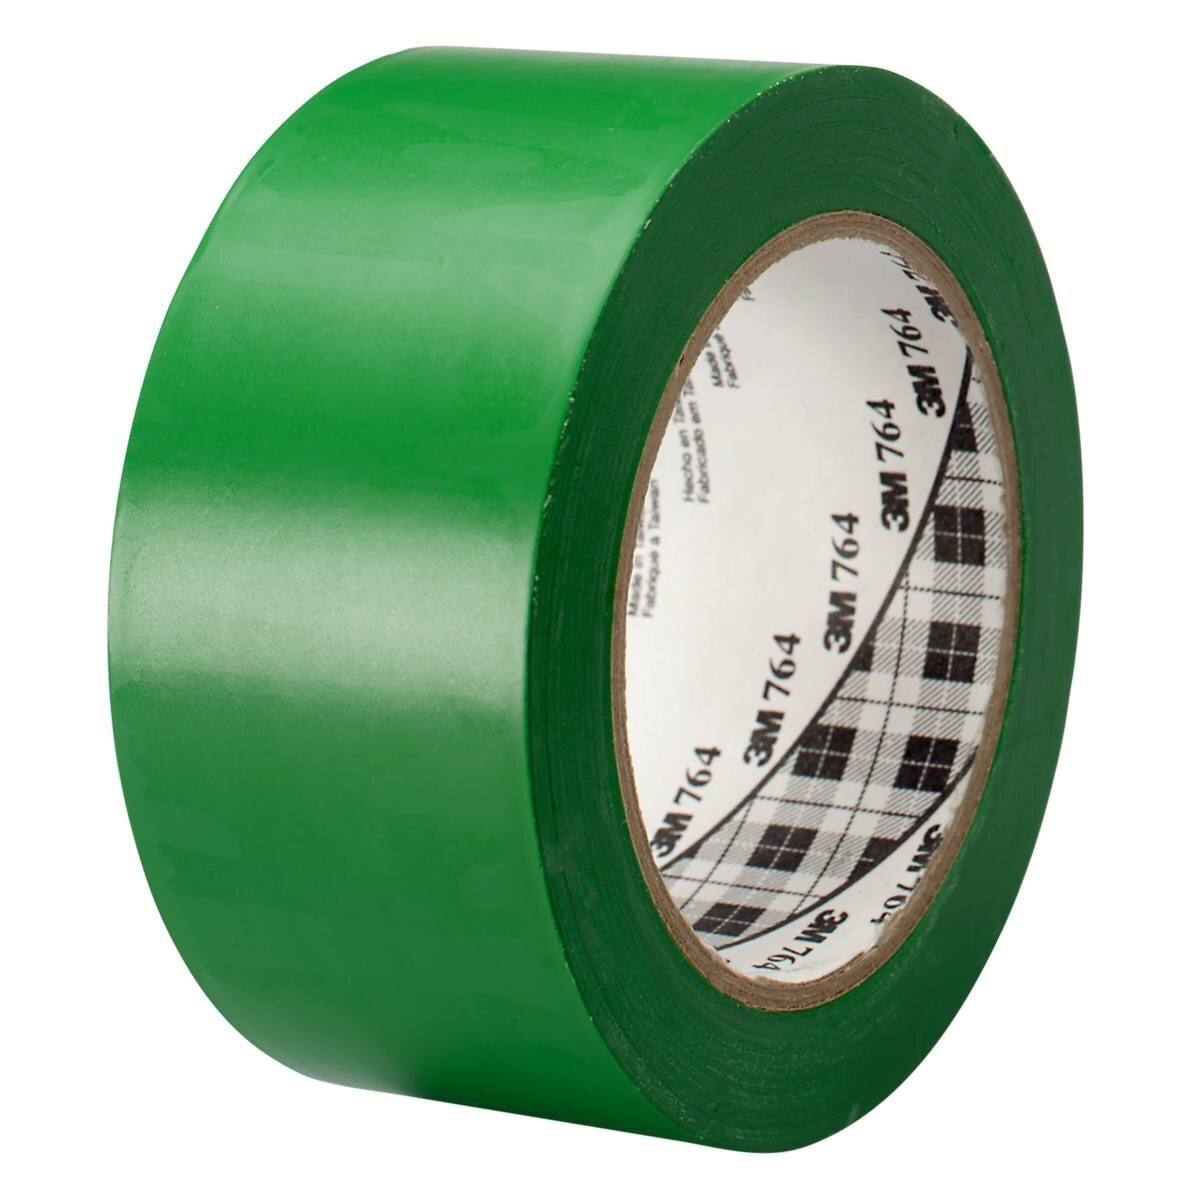 3M all-purpose PVC adhesive tape 764, green, 50 mm x 33 m, individually packed in practical packaging